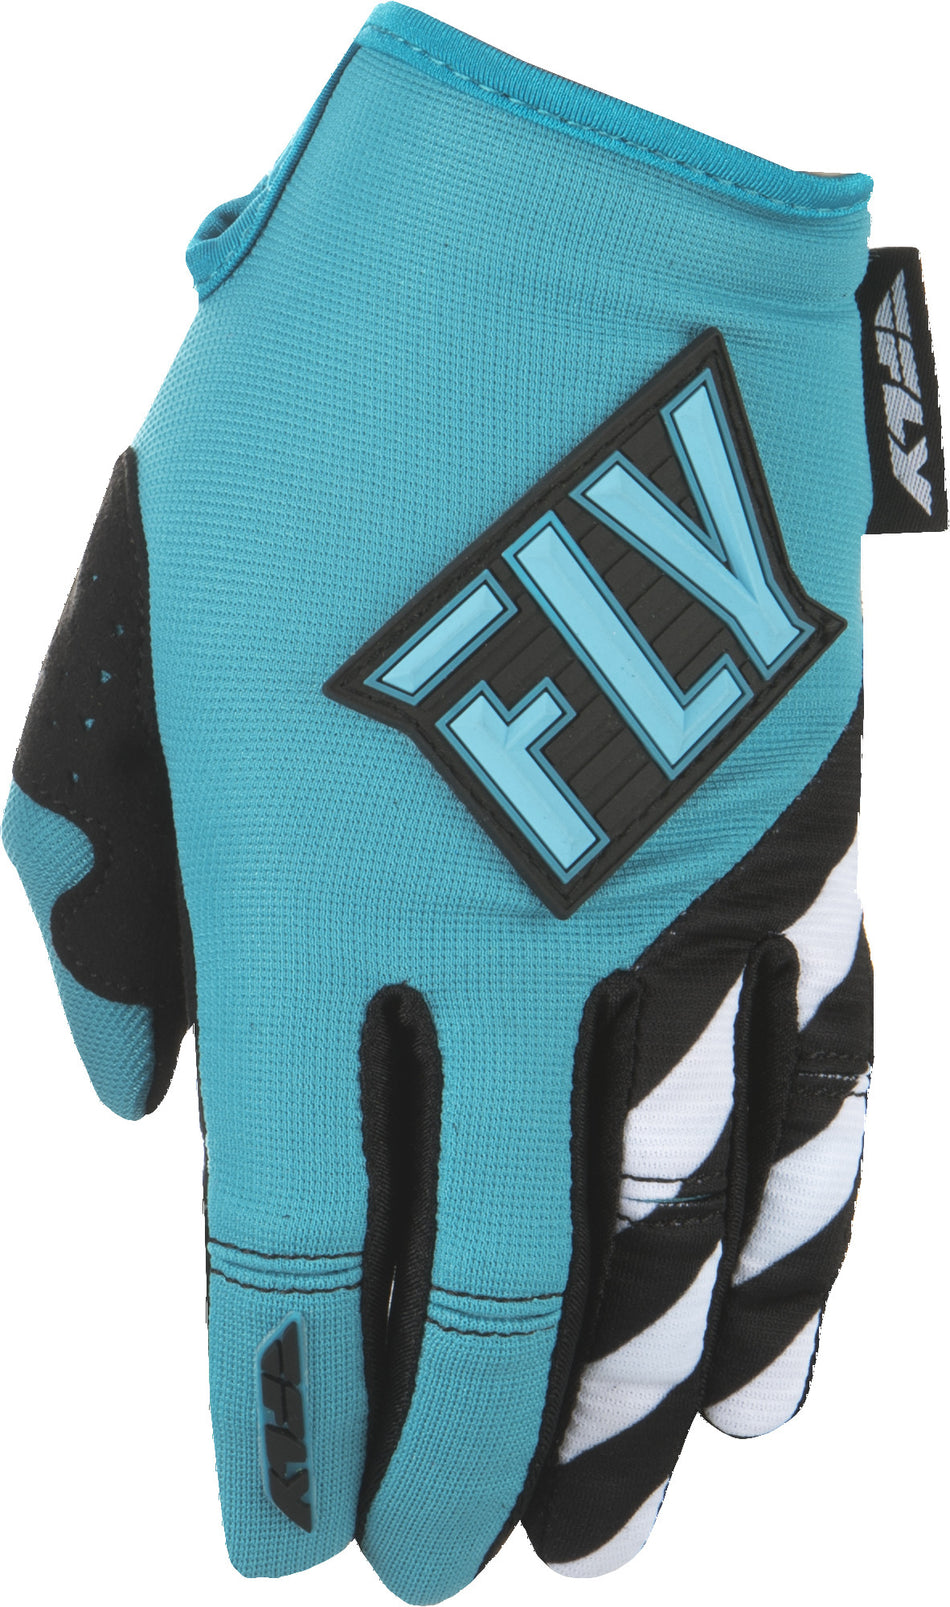 FLY RACING Kinetic Women's Gloves Blue/Teal S 371-61106